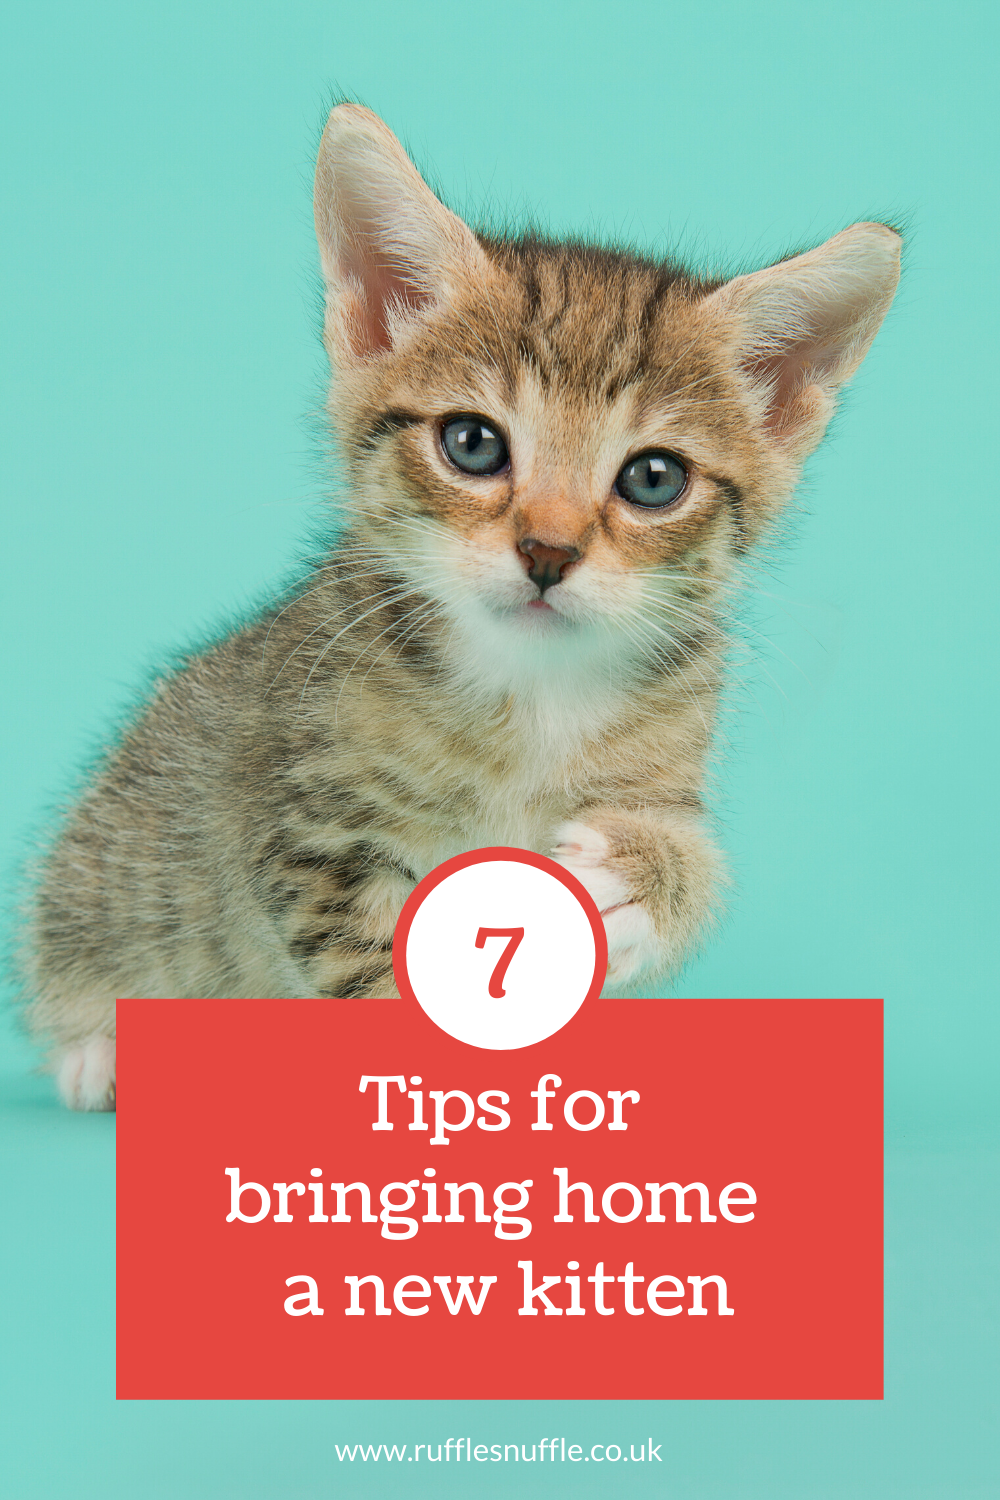 Tips on Bringing Home a New Kitten